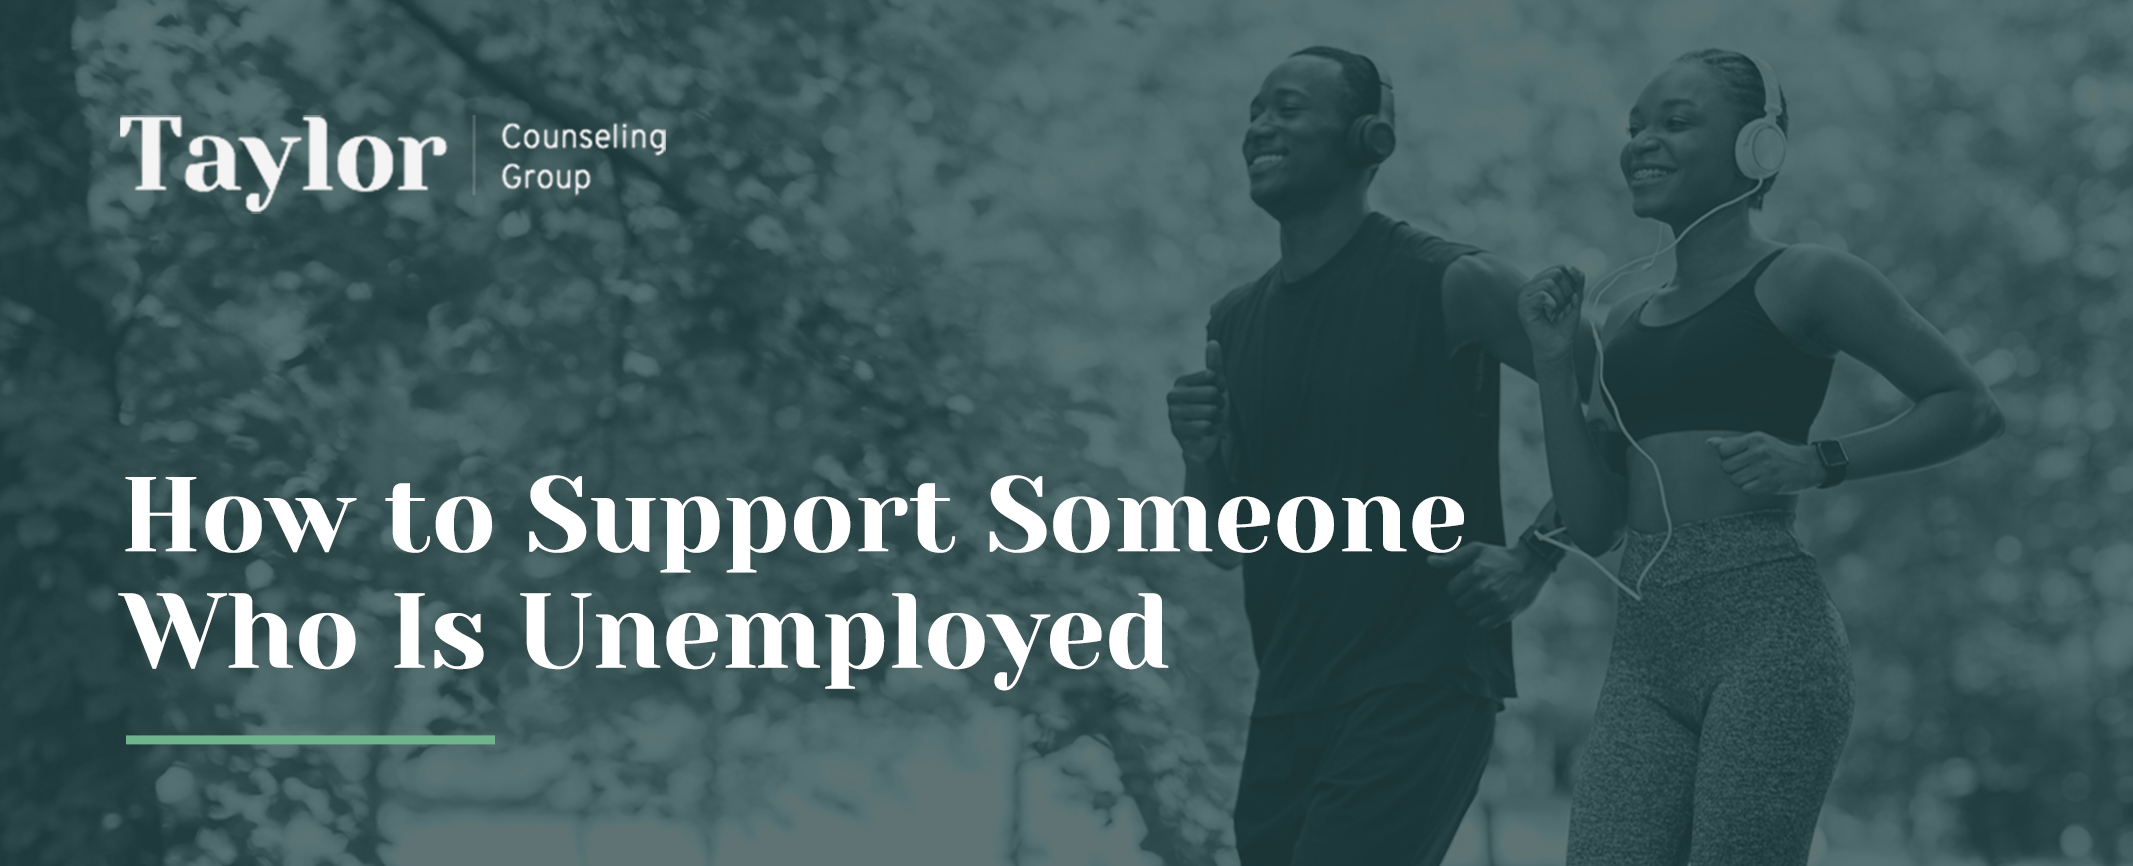 How to Support Someone Who Is Unemployed